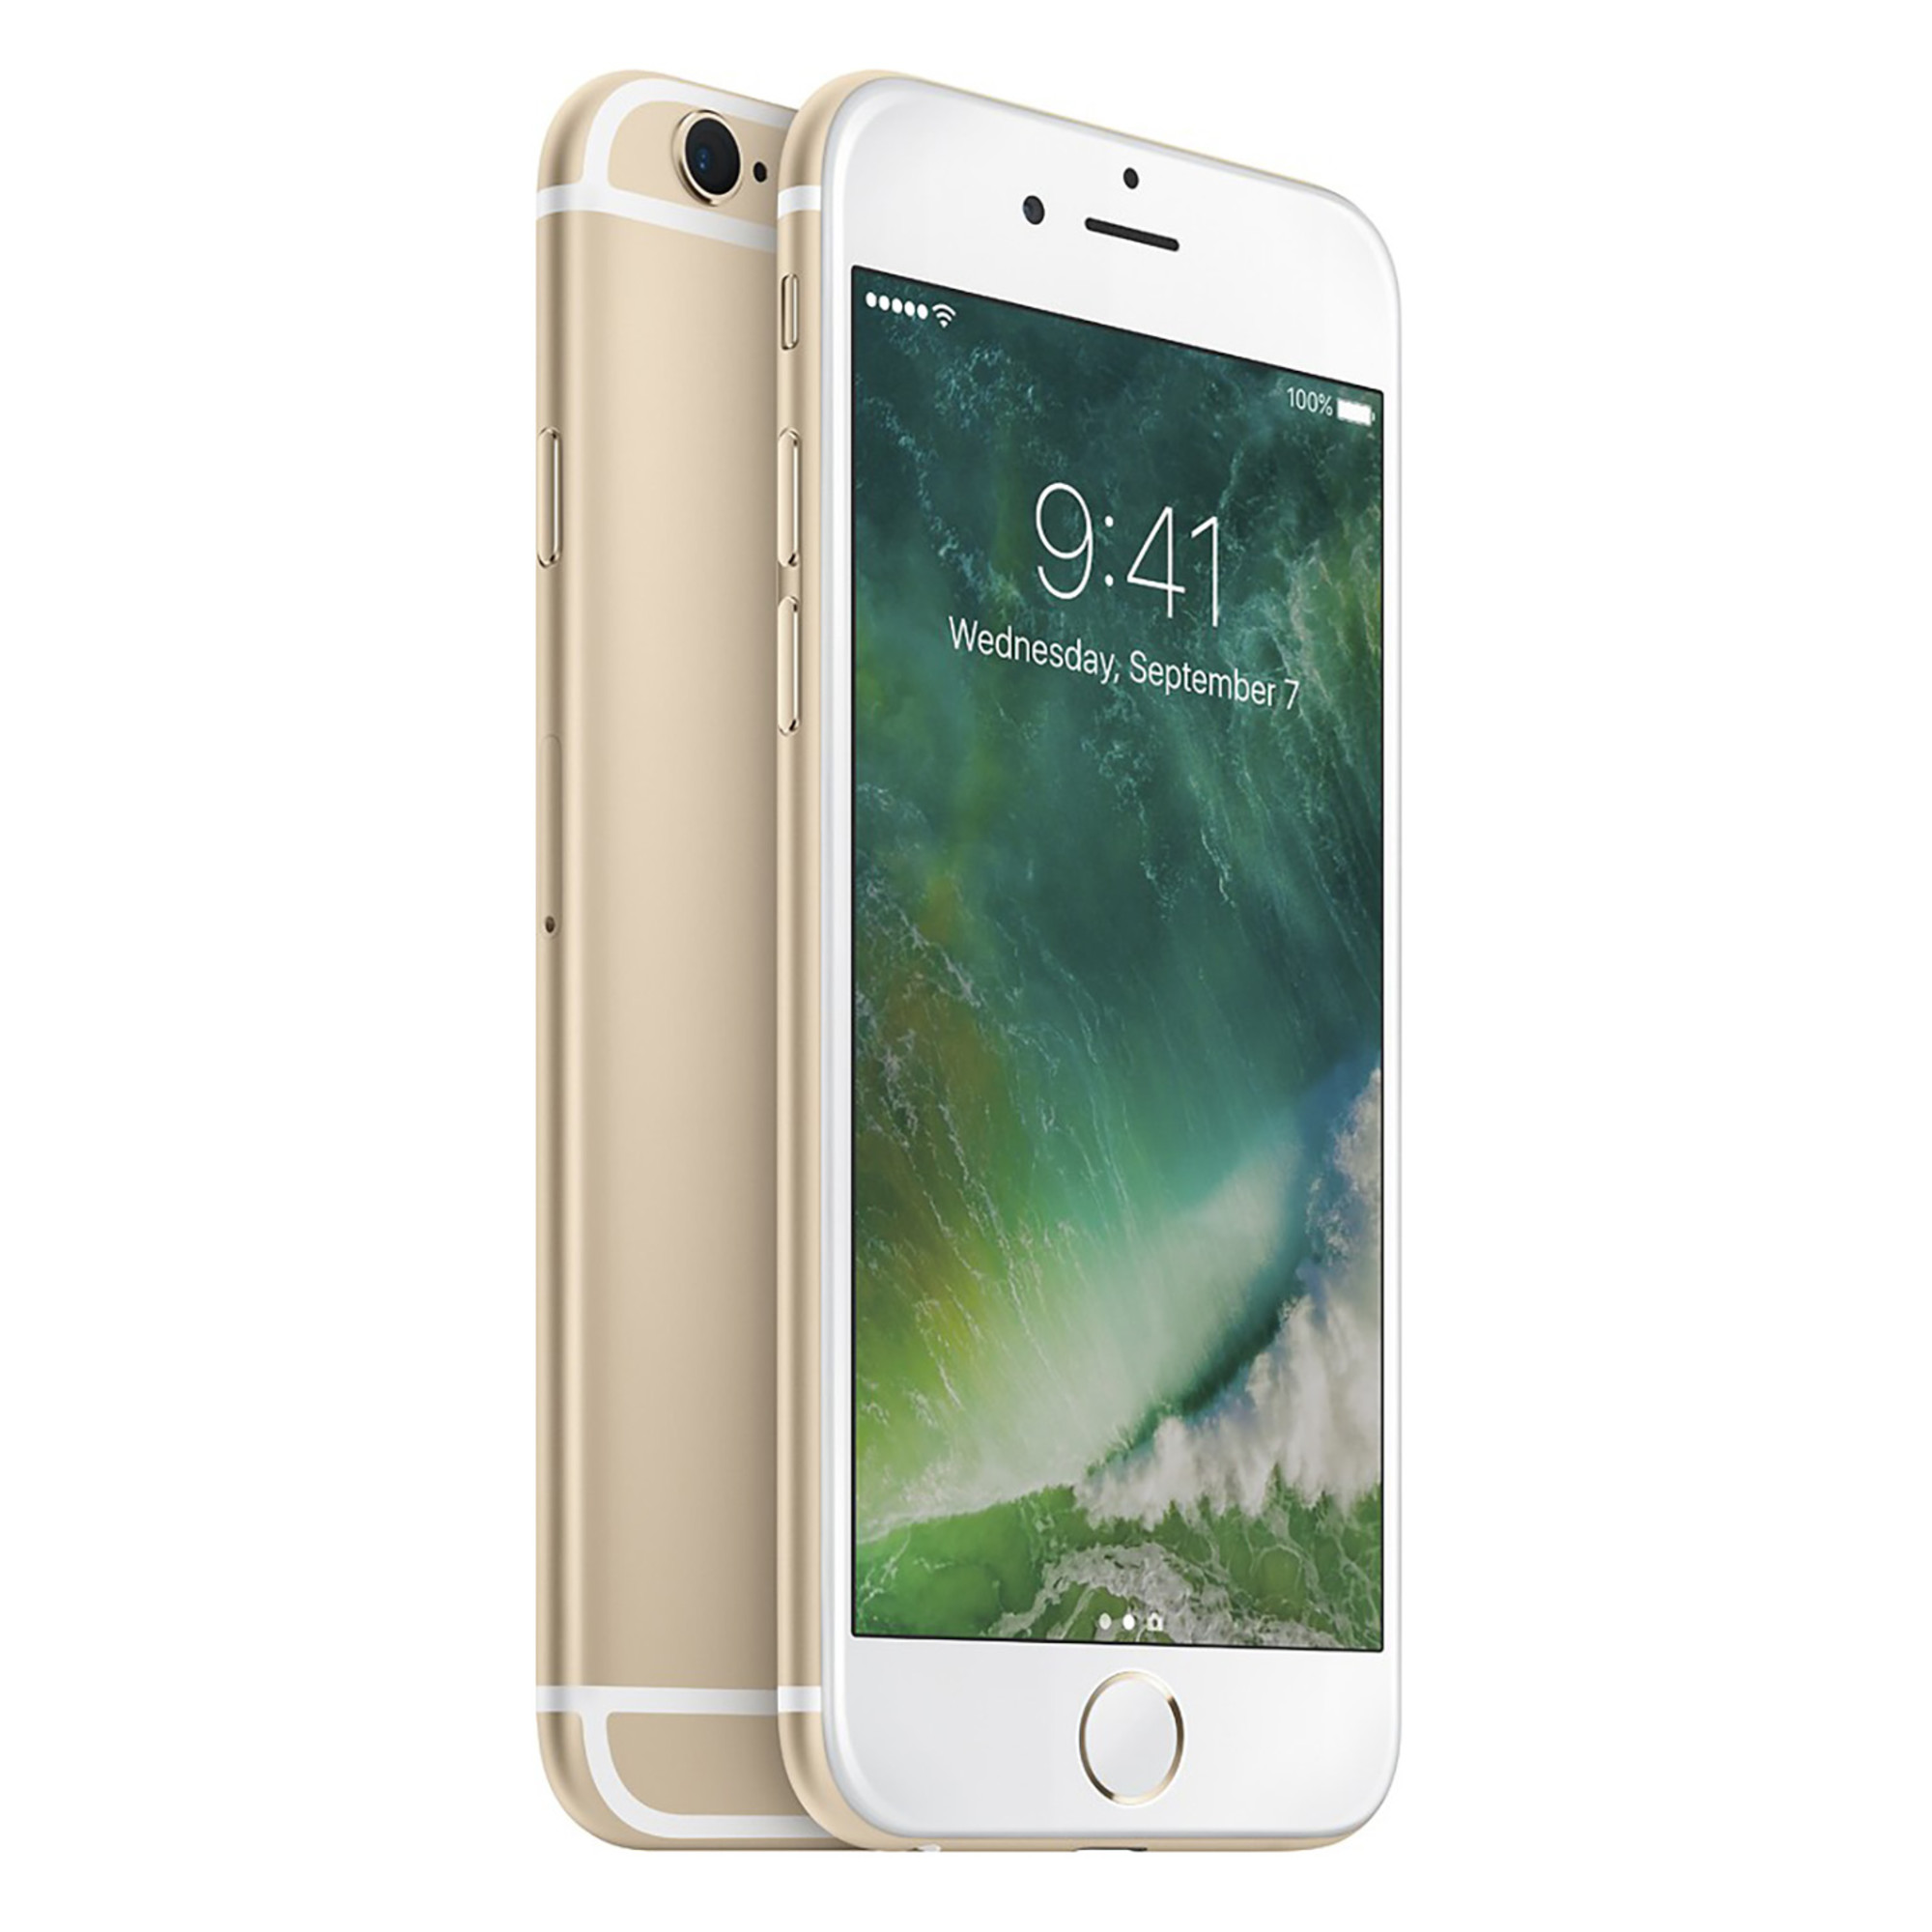 Pre-Owned Apple iPhone 6s 32GB GSM Phone - Gold + WeCare Alcohol Wipes Pack (50 Wipes) - image 1 of 6